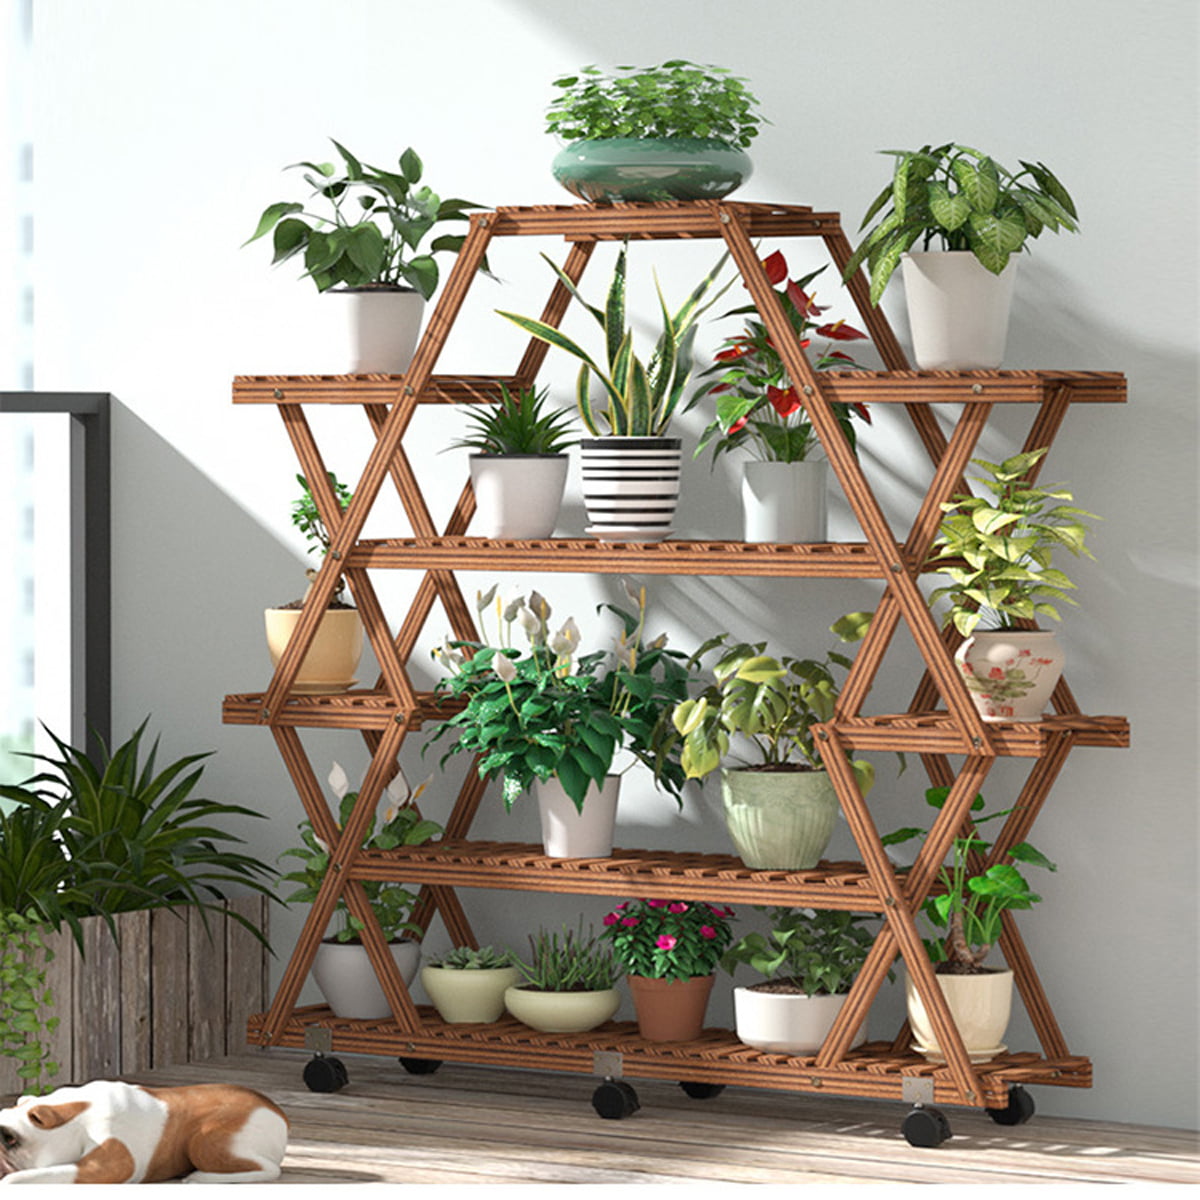 Extra Large Wood Plant Stand Flower Steady Rolling Carbonized Rack Outdoor Yard